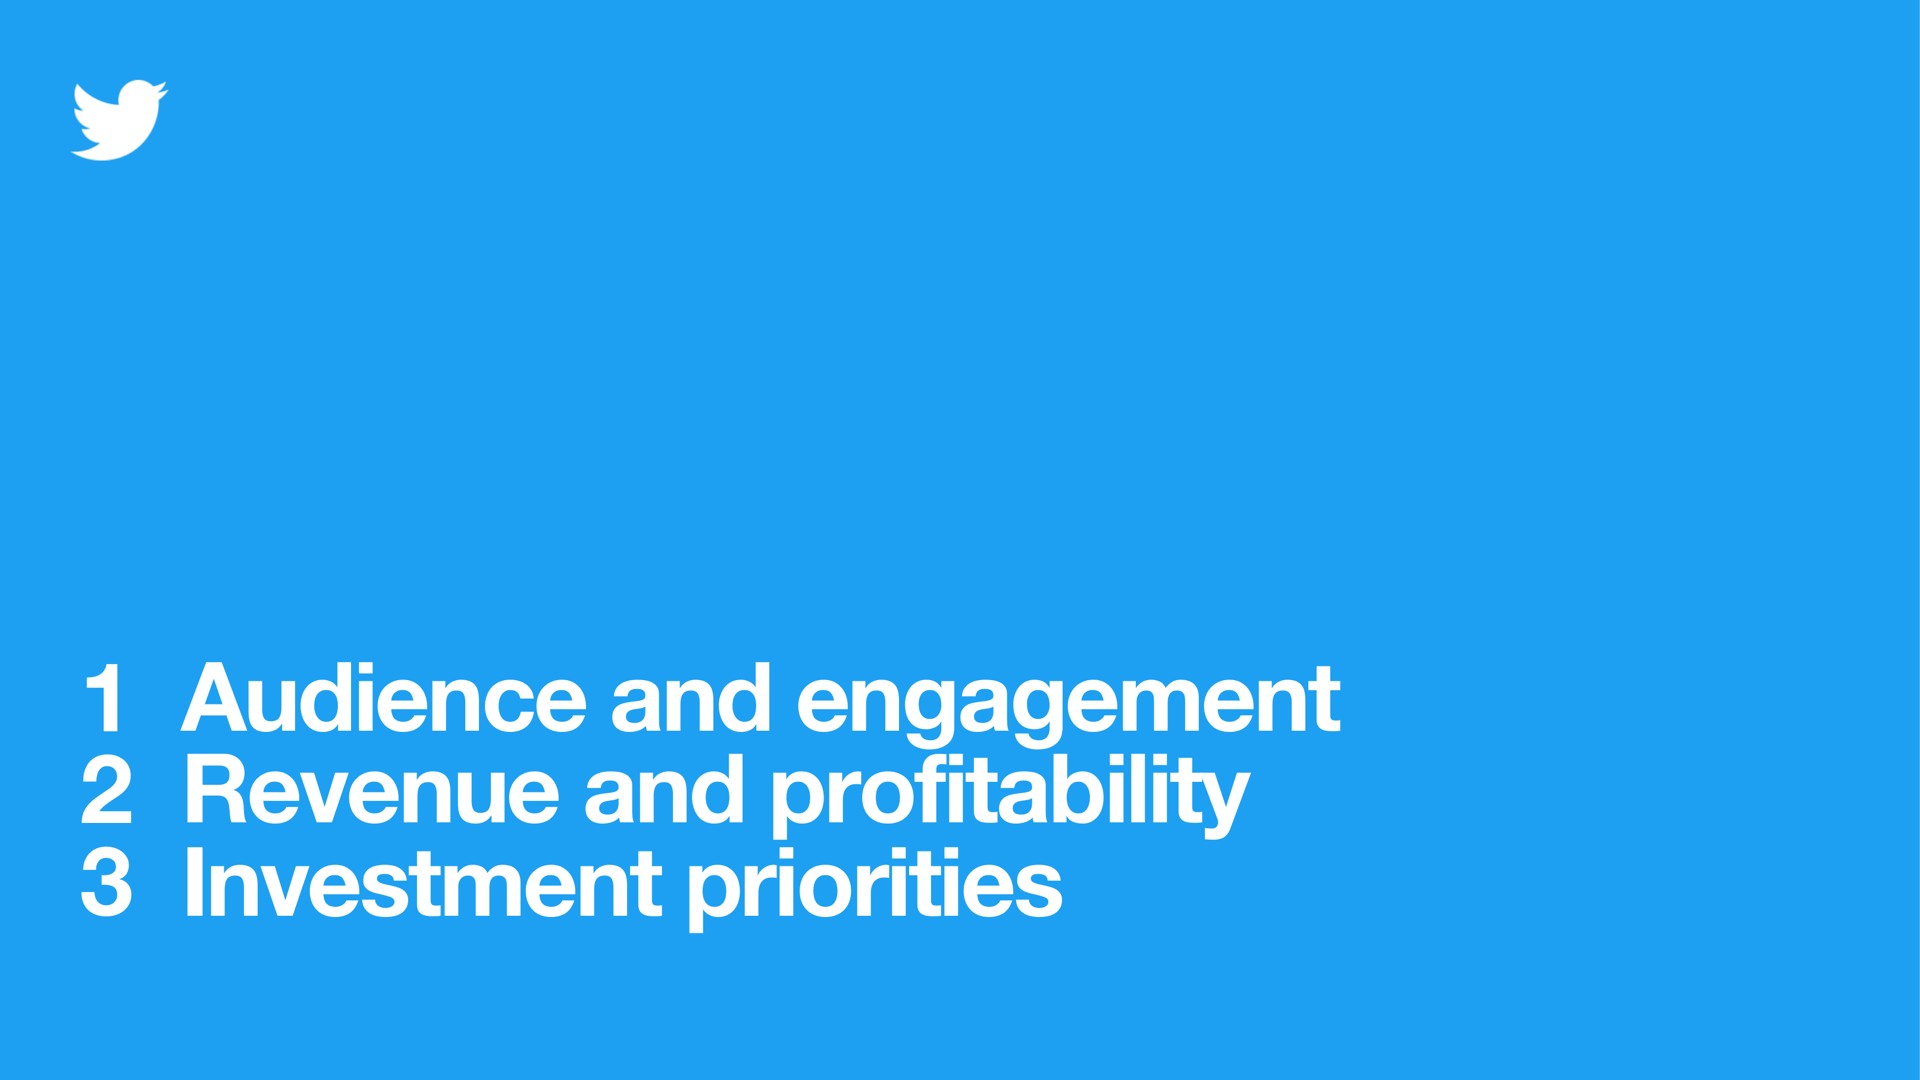 audience and engagement revenue and profitability investment priorities | Twitter